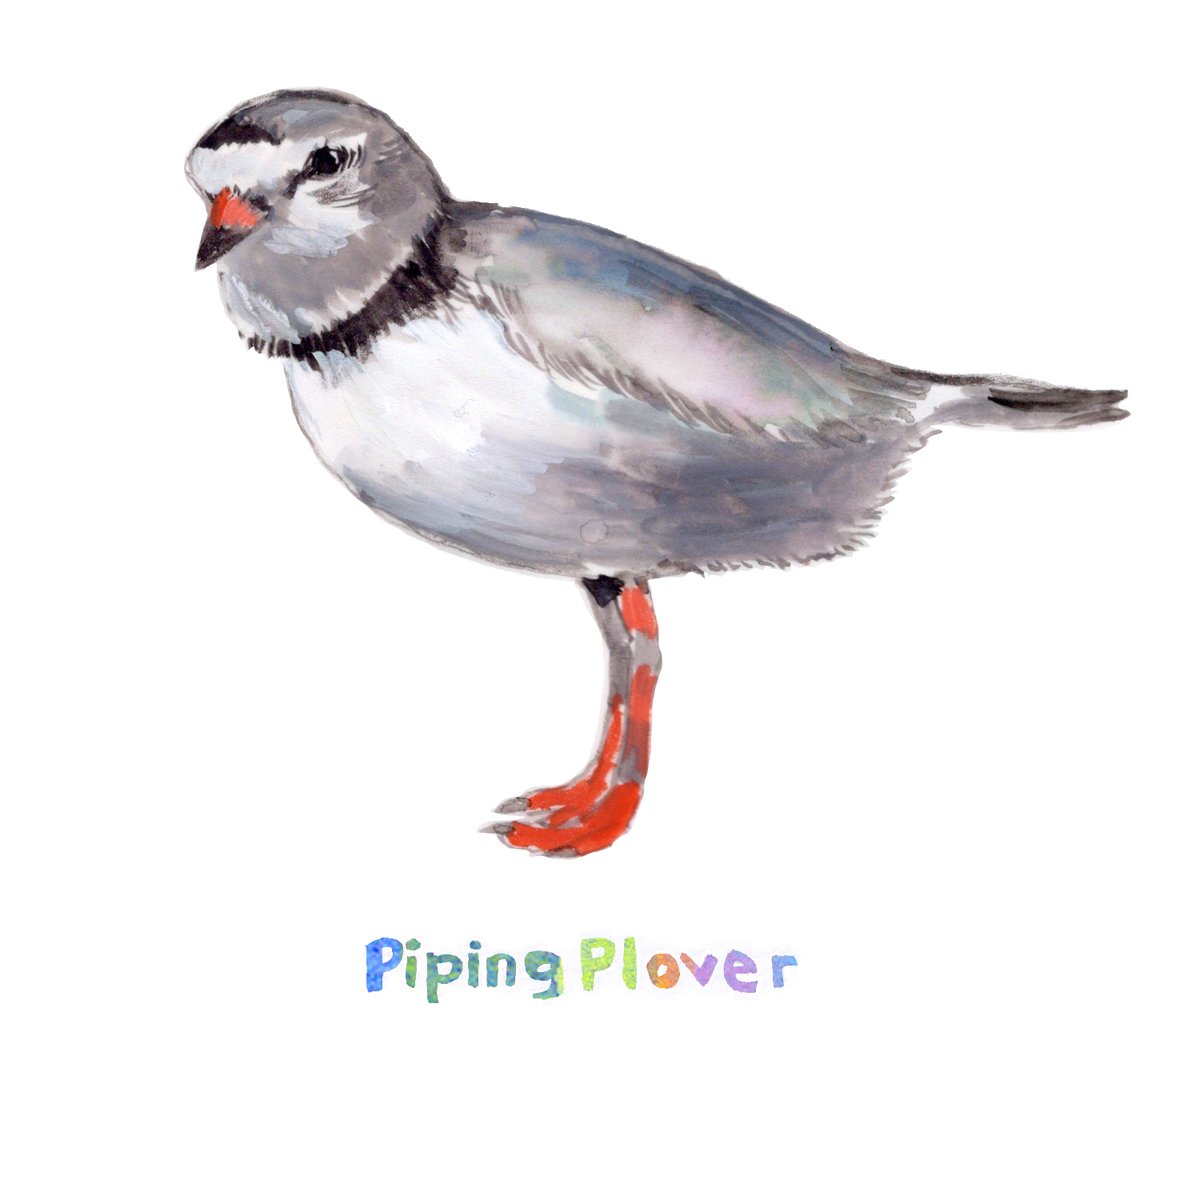 Every year, the third Friday in May is #EndangeredSpeciesDay. New Yorkers like the NYC Plover Project are dedicated to protecting endangered piping plovers and other shorebirds on our beaches.🐦 nycploverproject.org/about-us